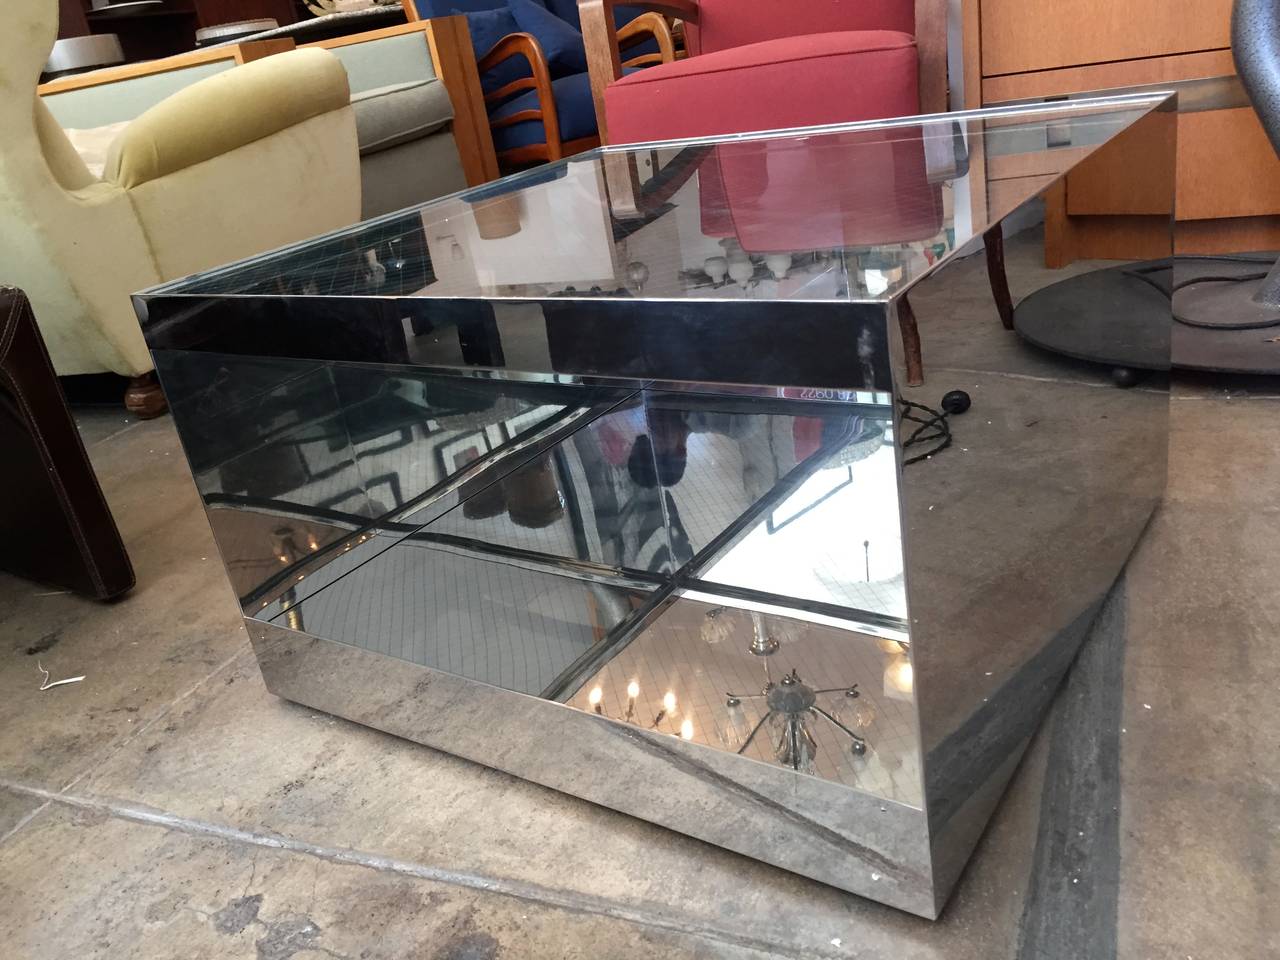 A sleek iconic polished steel and safety glass table designed by Joe D'urso for Knoll. This version is the medium coffee or side size 27" x 27". It open on one side allowing a shelf space and has bottom castors for easy movement.